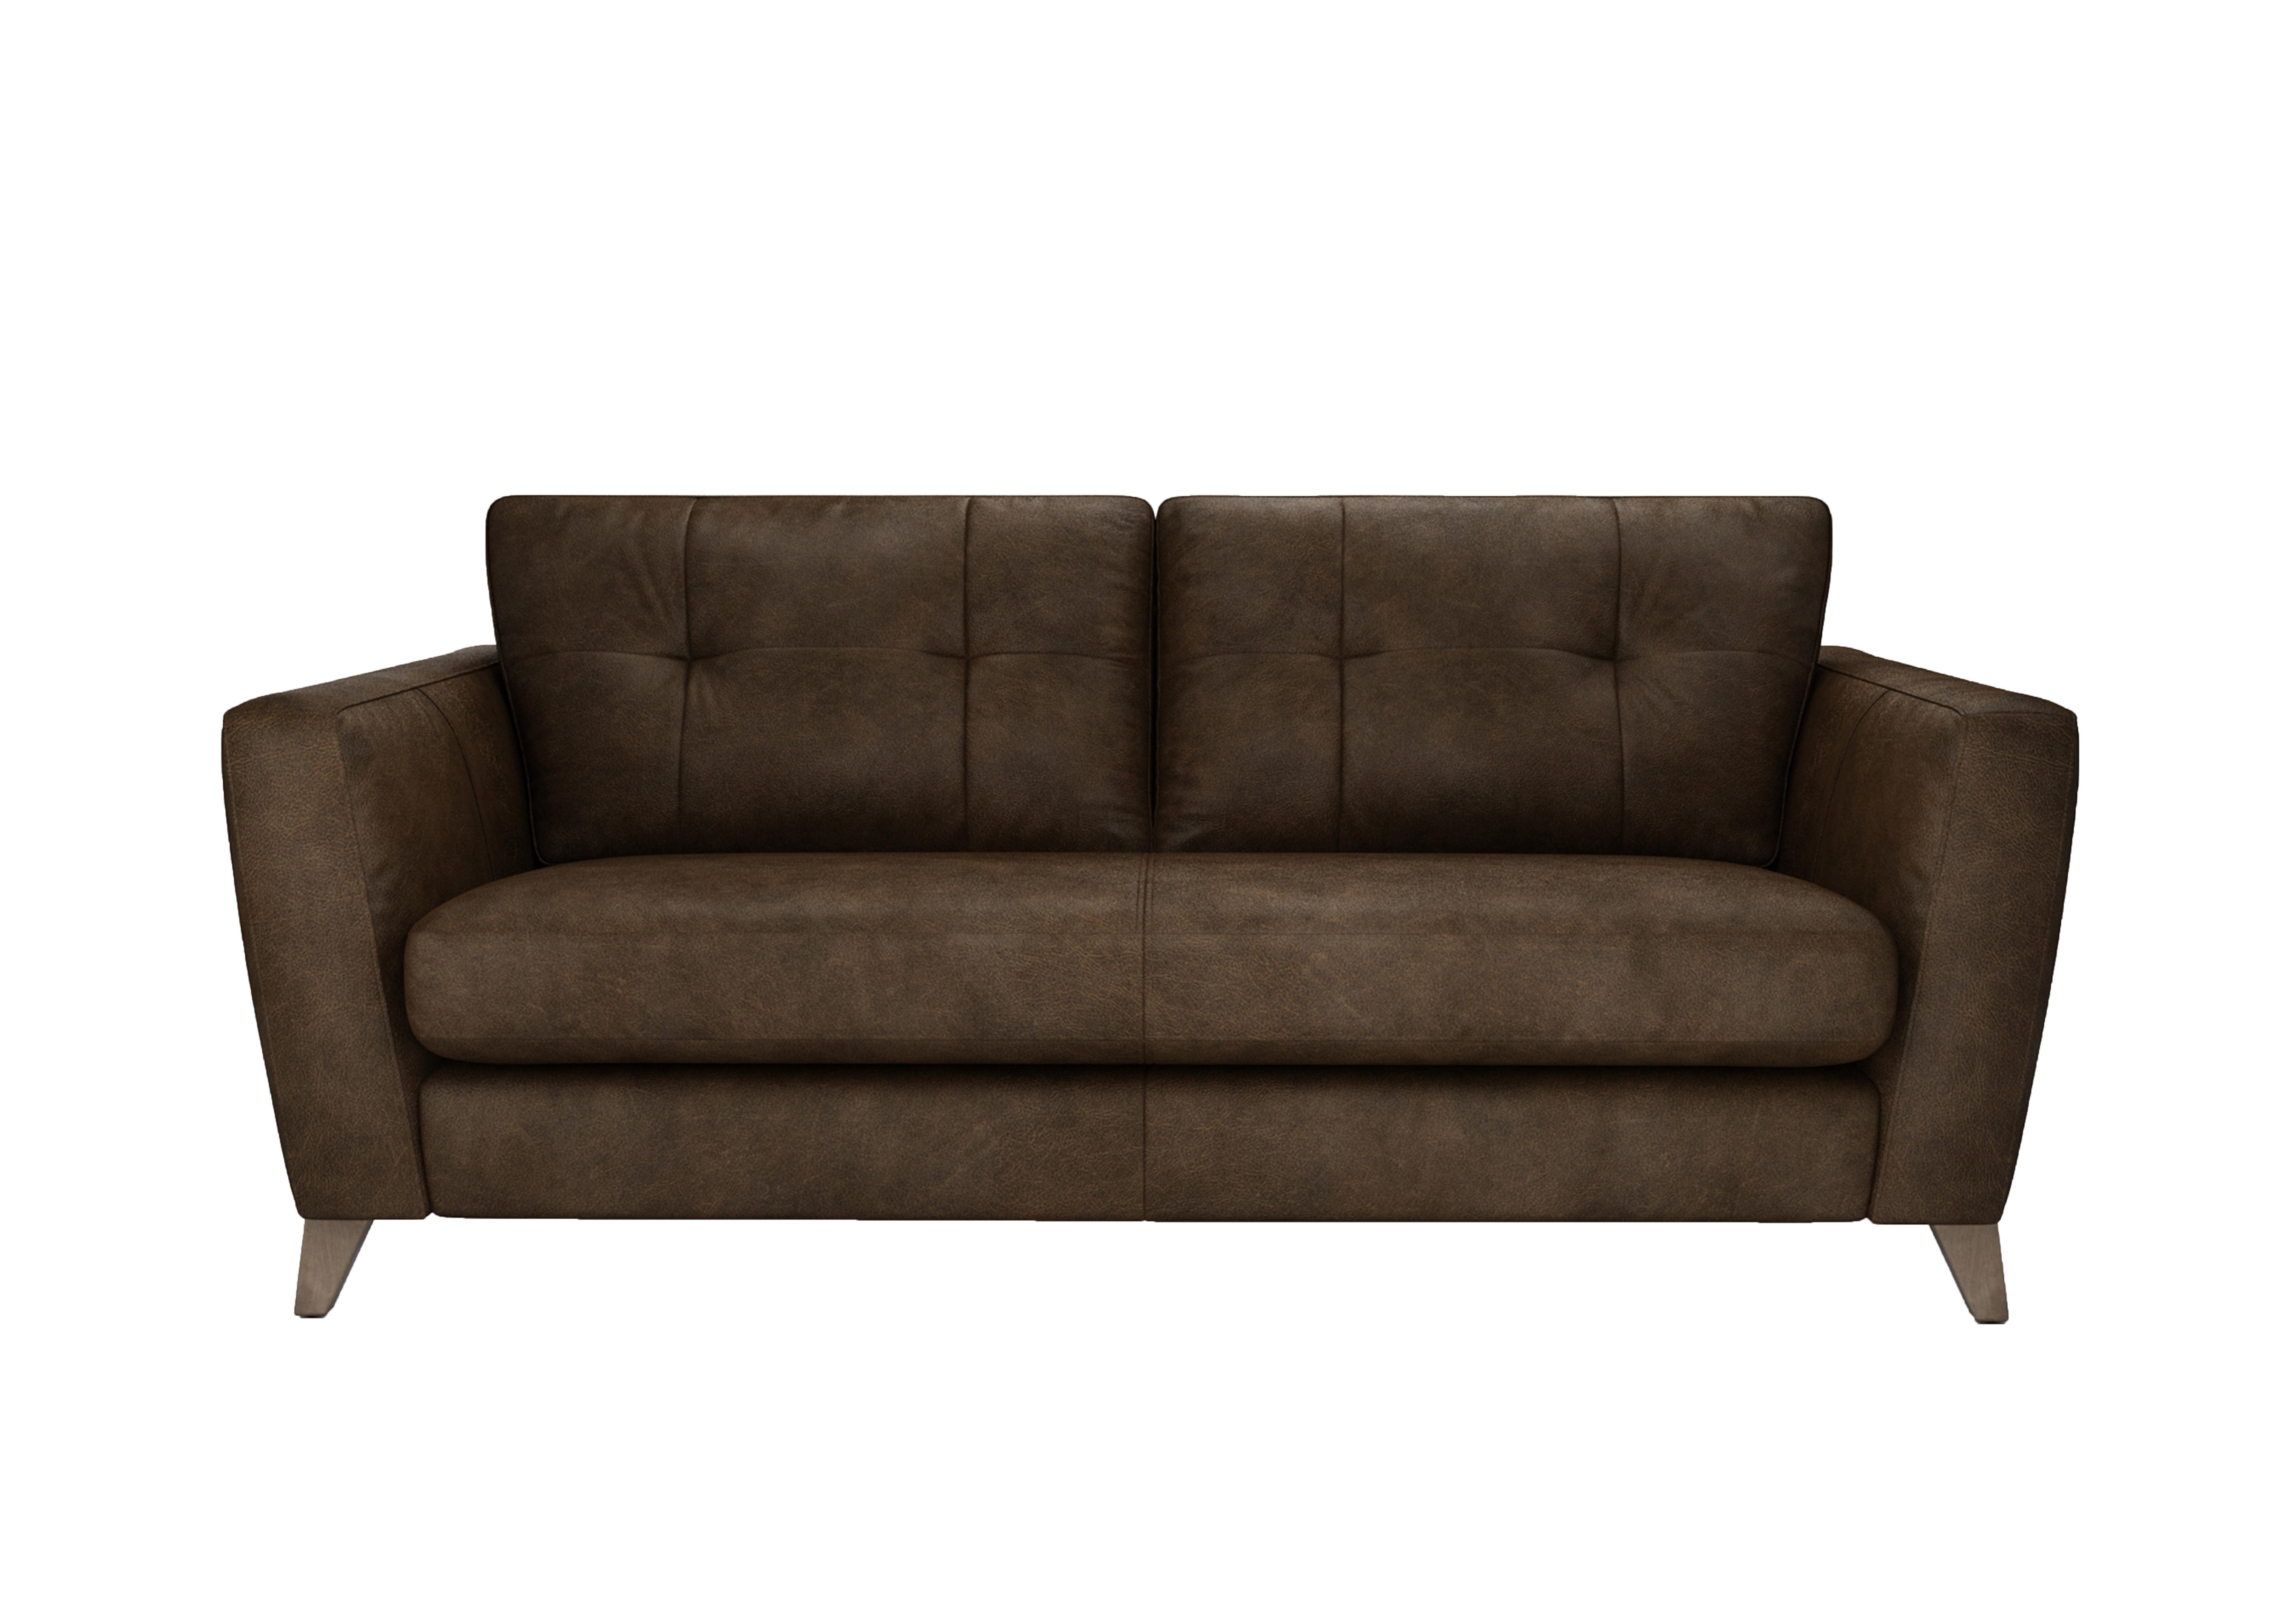 Hermione 3 Seater Leather Sofa in Bou192 Bourbon Wo Ft on Furniture Village